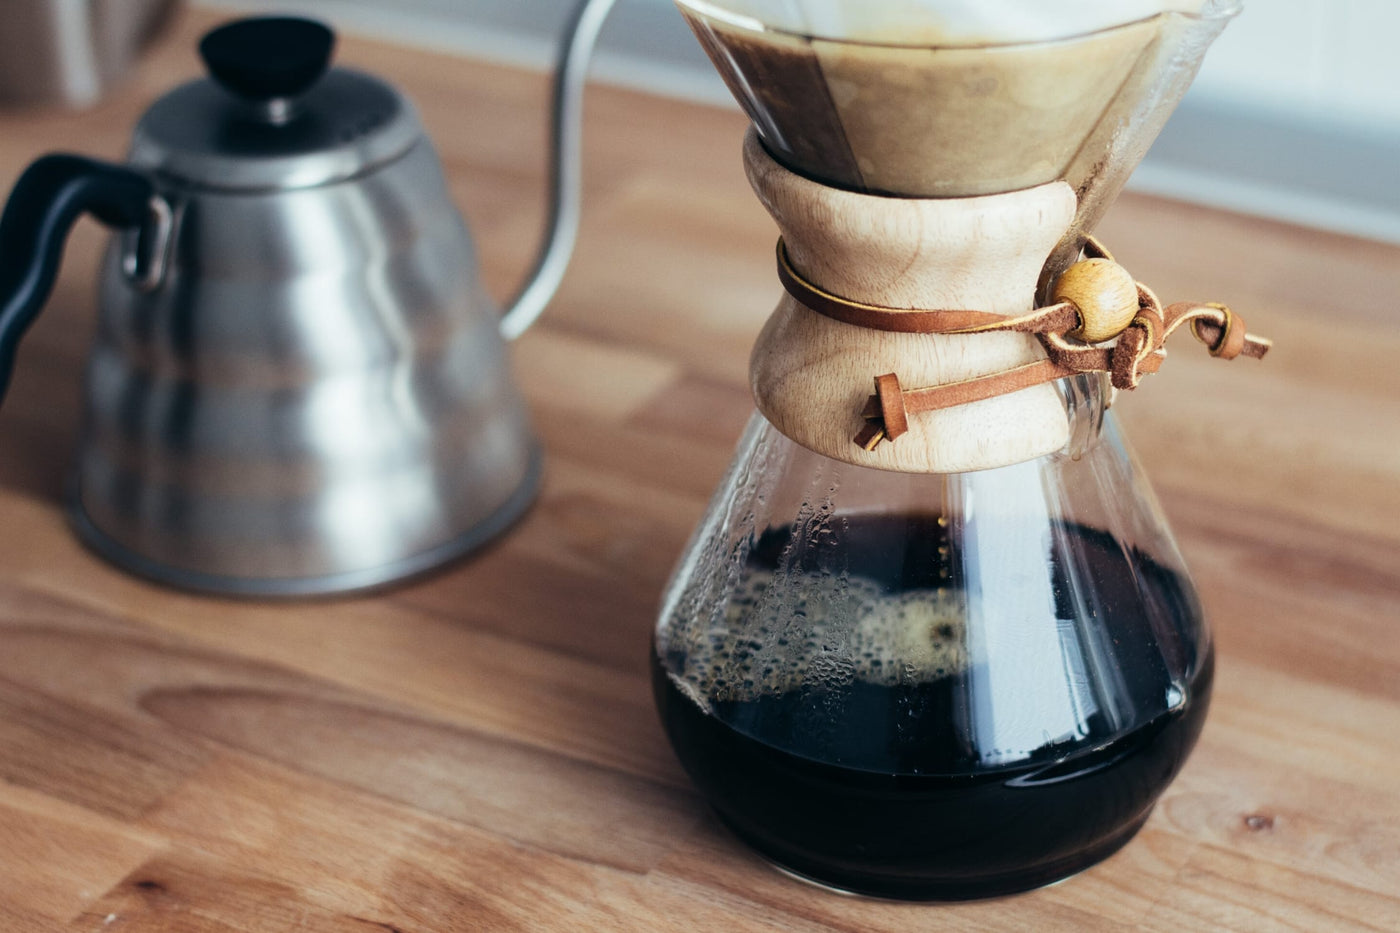 Learn how to brew coffee using the Chemex